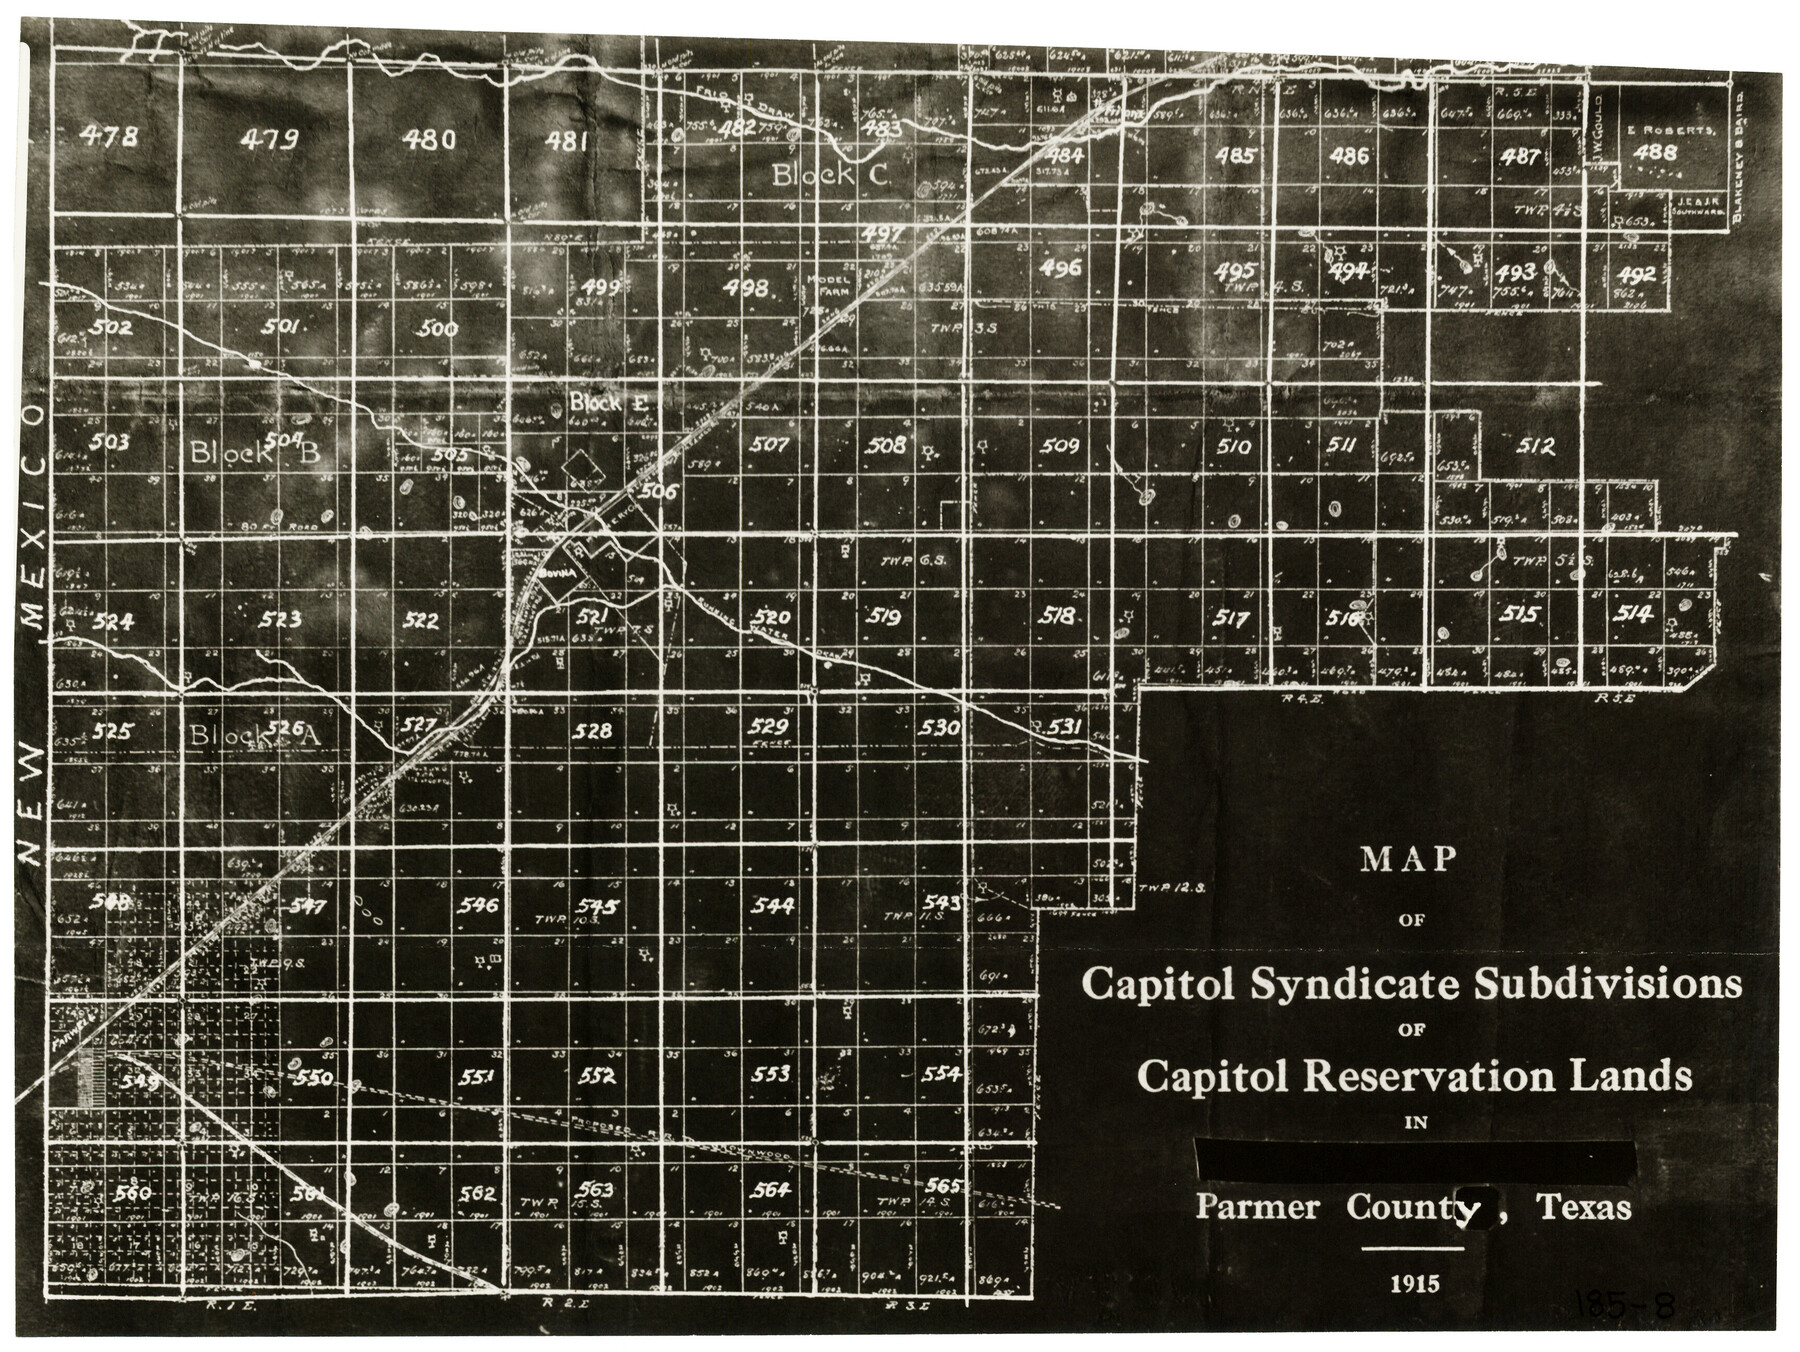 91553, Map of Capitol Syndicate Subdivisions of Capitol Reservation Lands in Parmer County, Texas, Twichell Survey Records